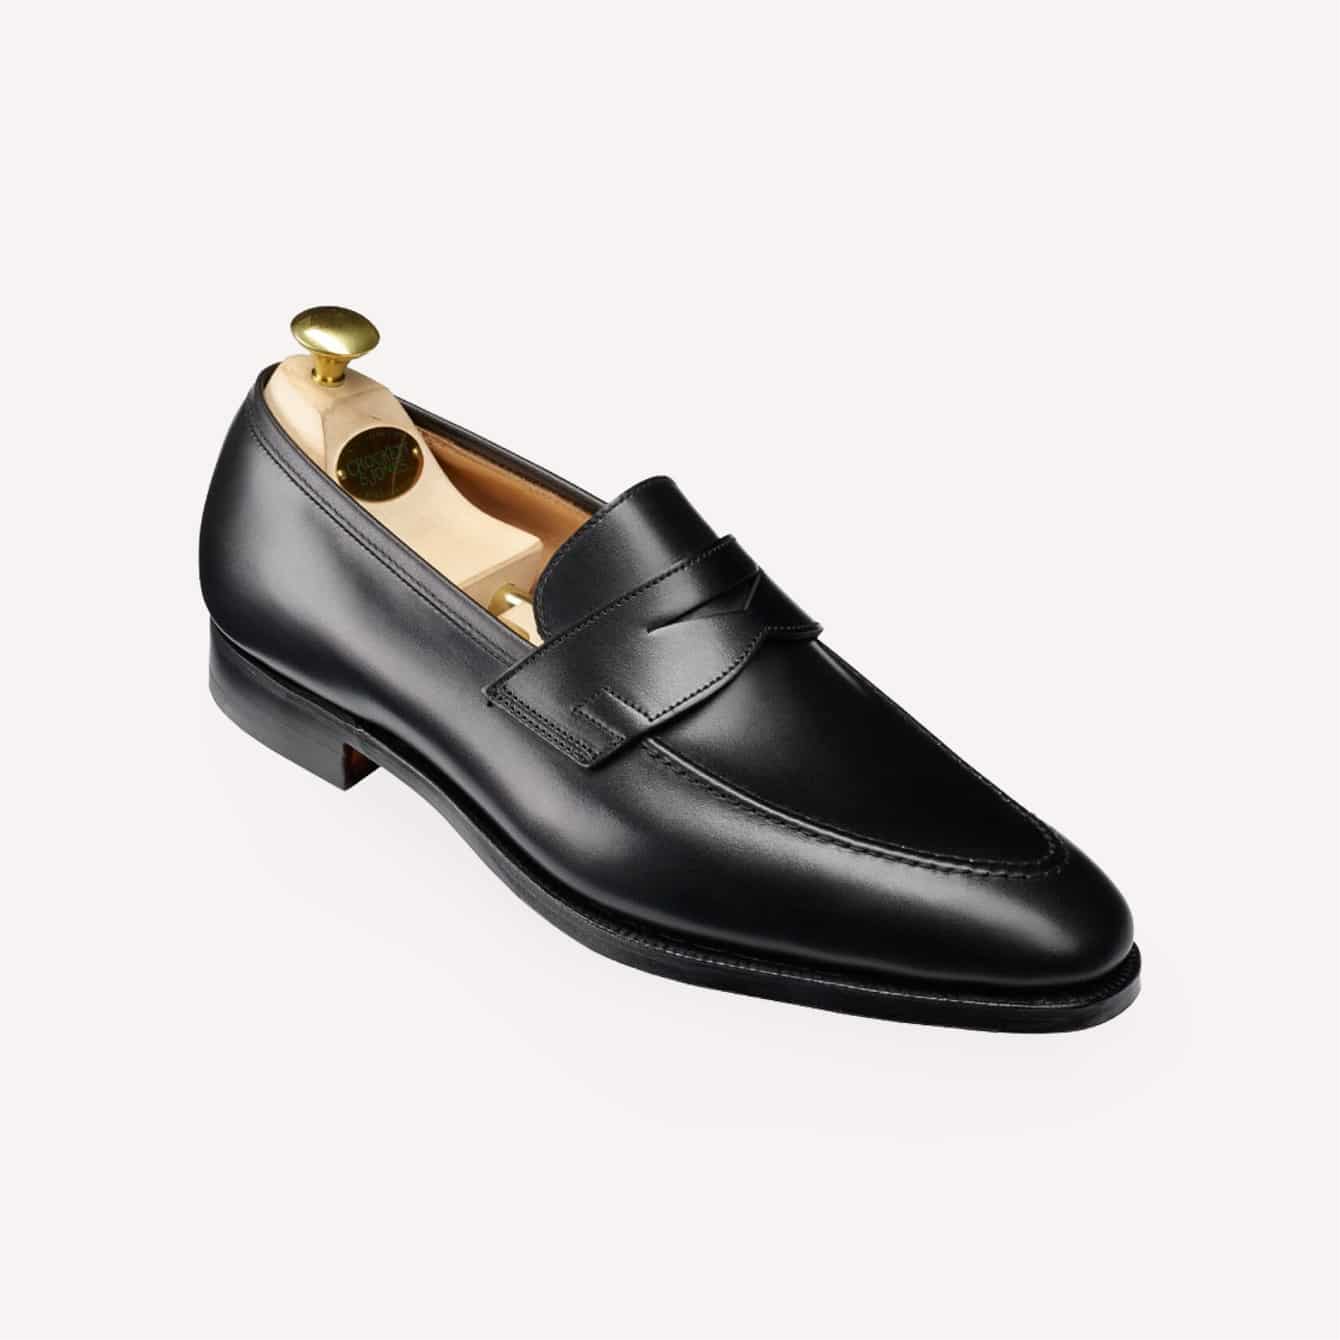 The Best Men's Dress Shoes for Any Budget - The Modest Man